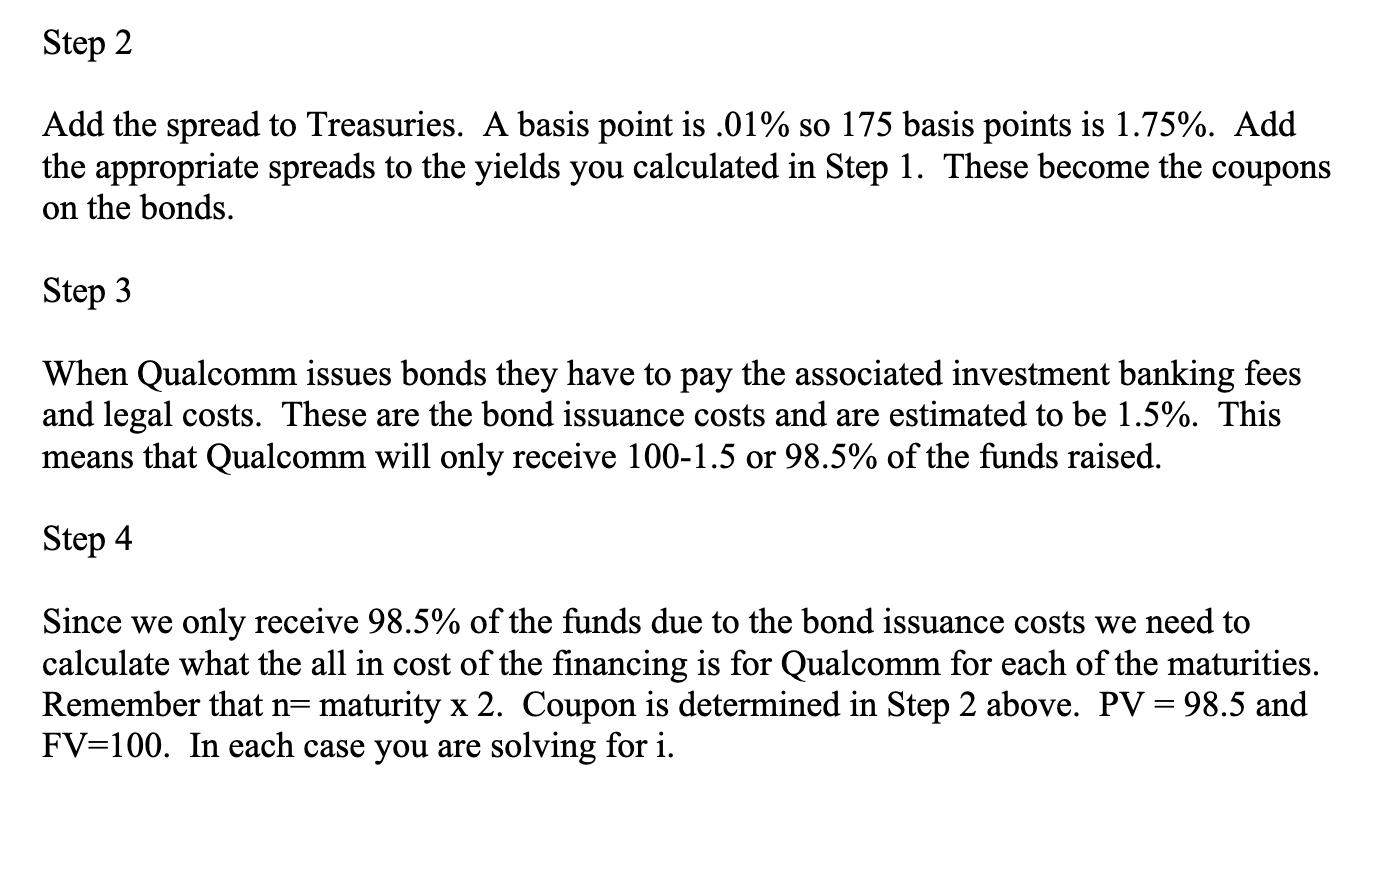 Step 2 Add the spread to Treasuries. A basis point is .01% so 175 basis points is 1.75%. Add the appropriate